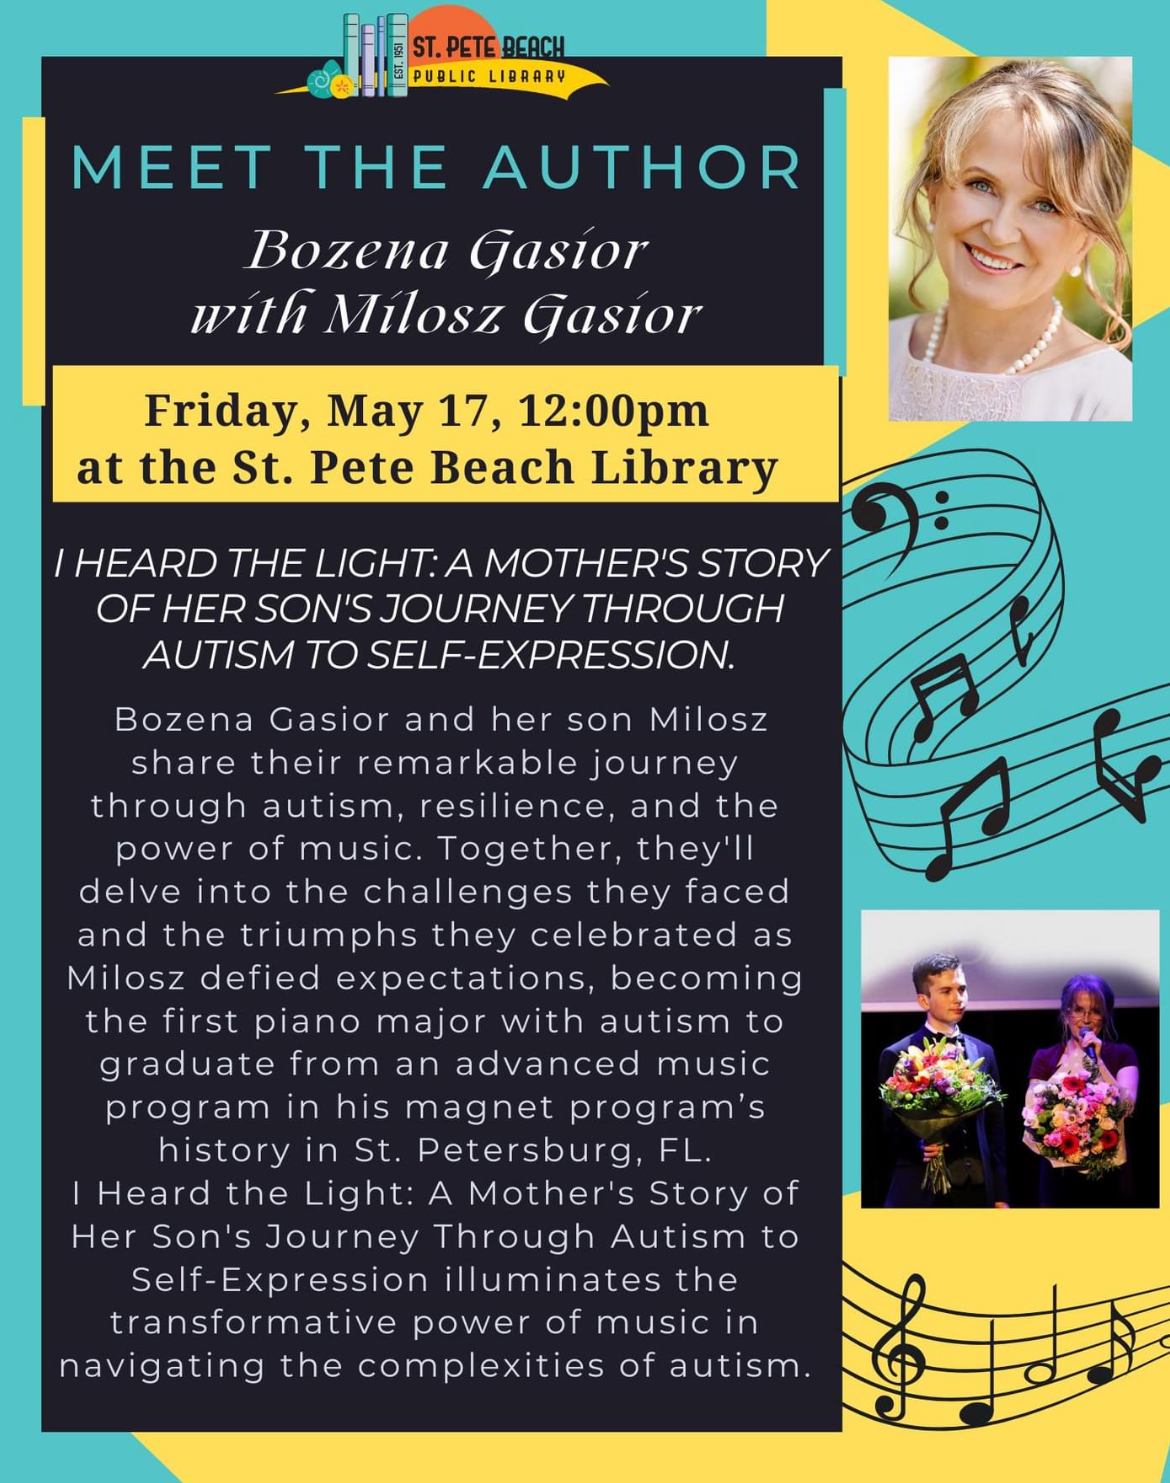 This graphic is for Bozena Gasior book reading!